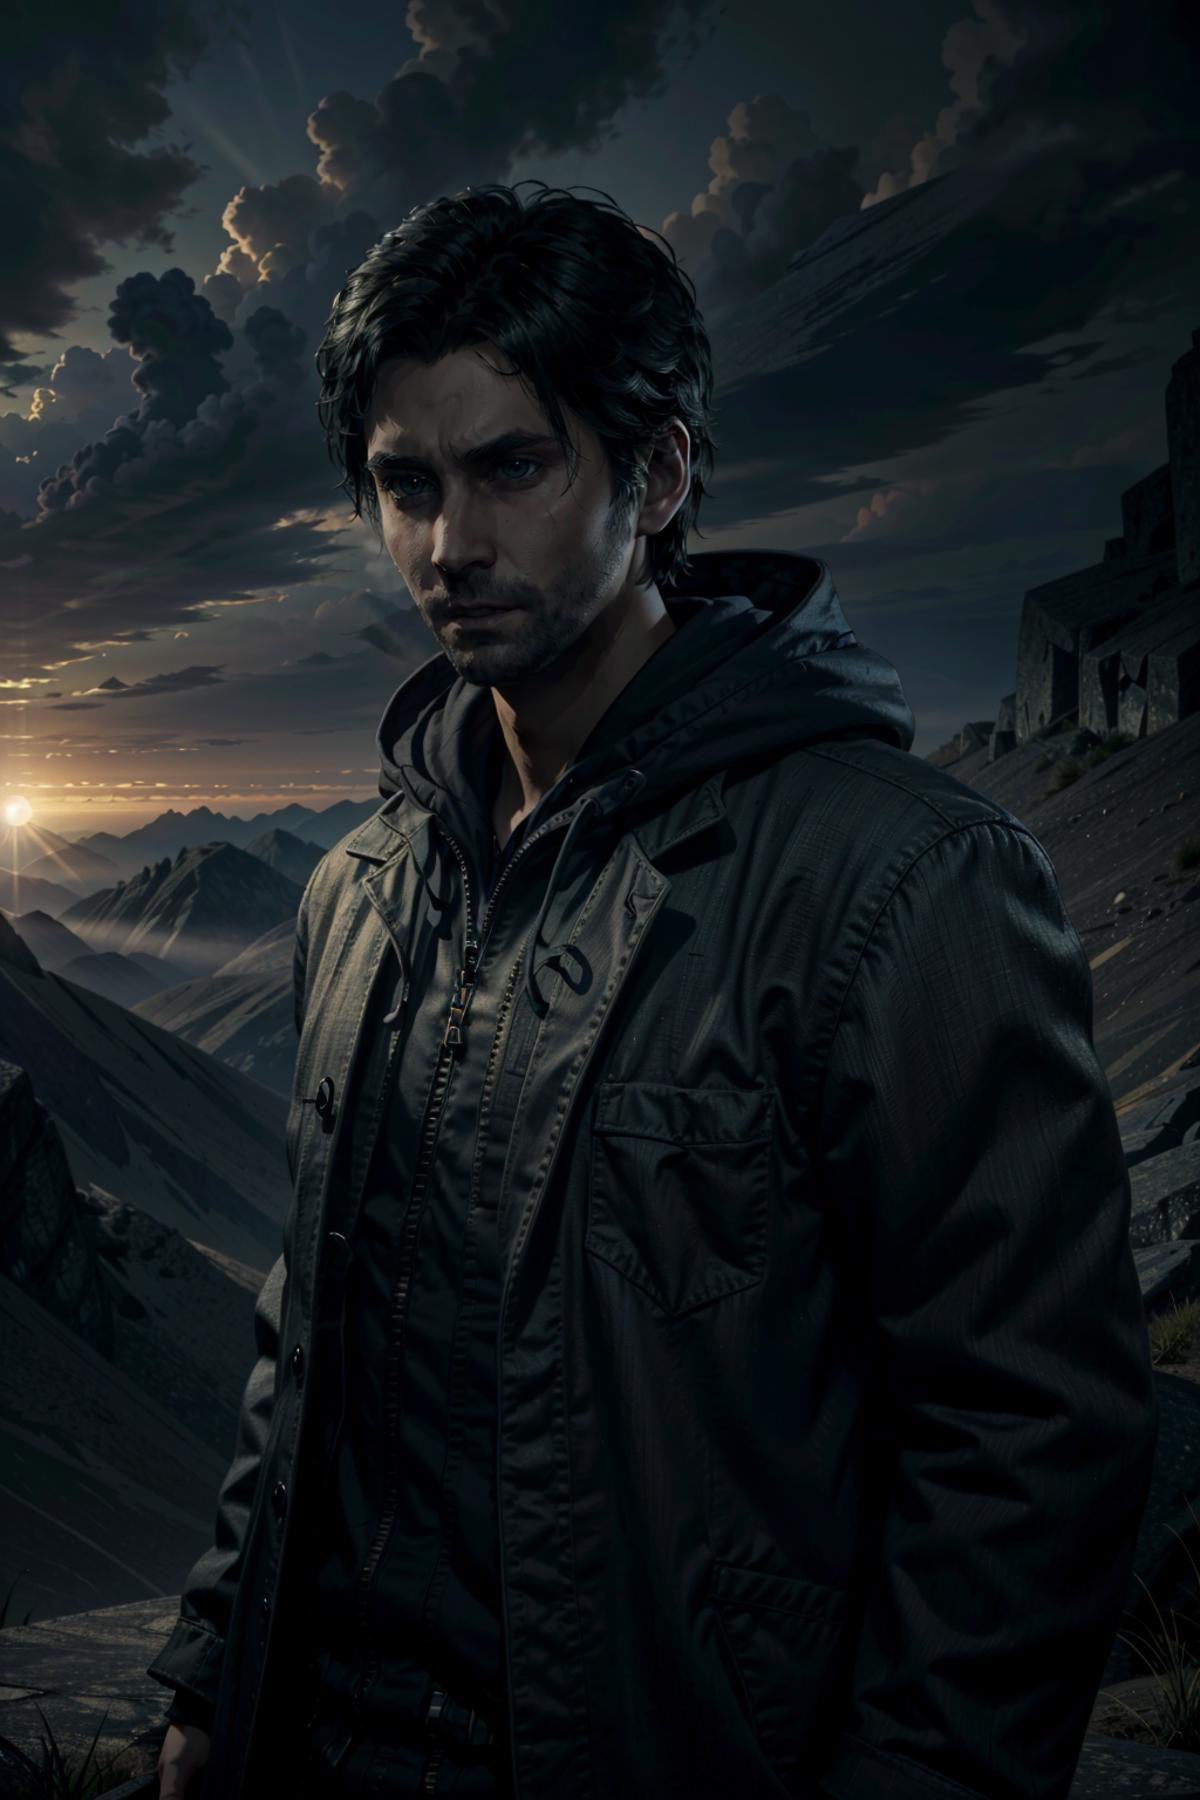 Alan from Alan Wake image by BloodRedKittie